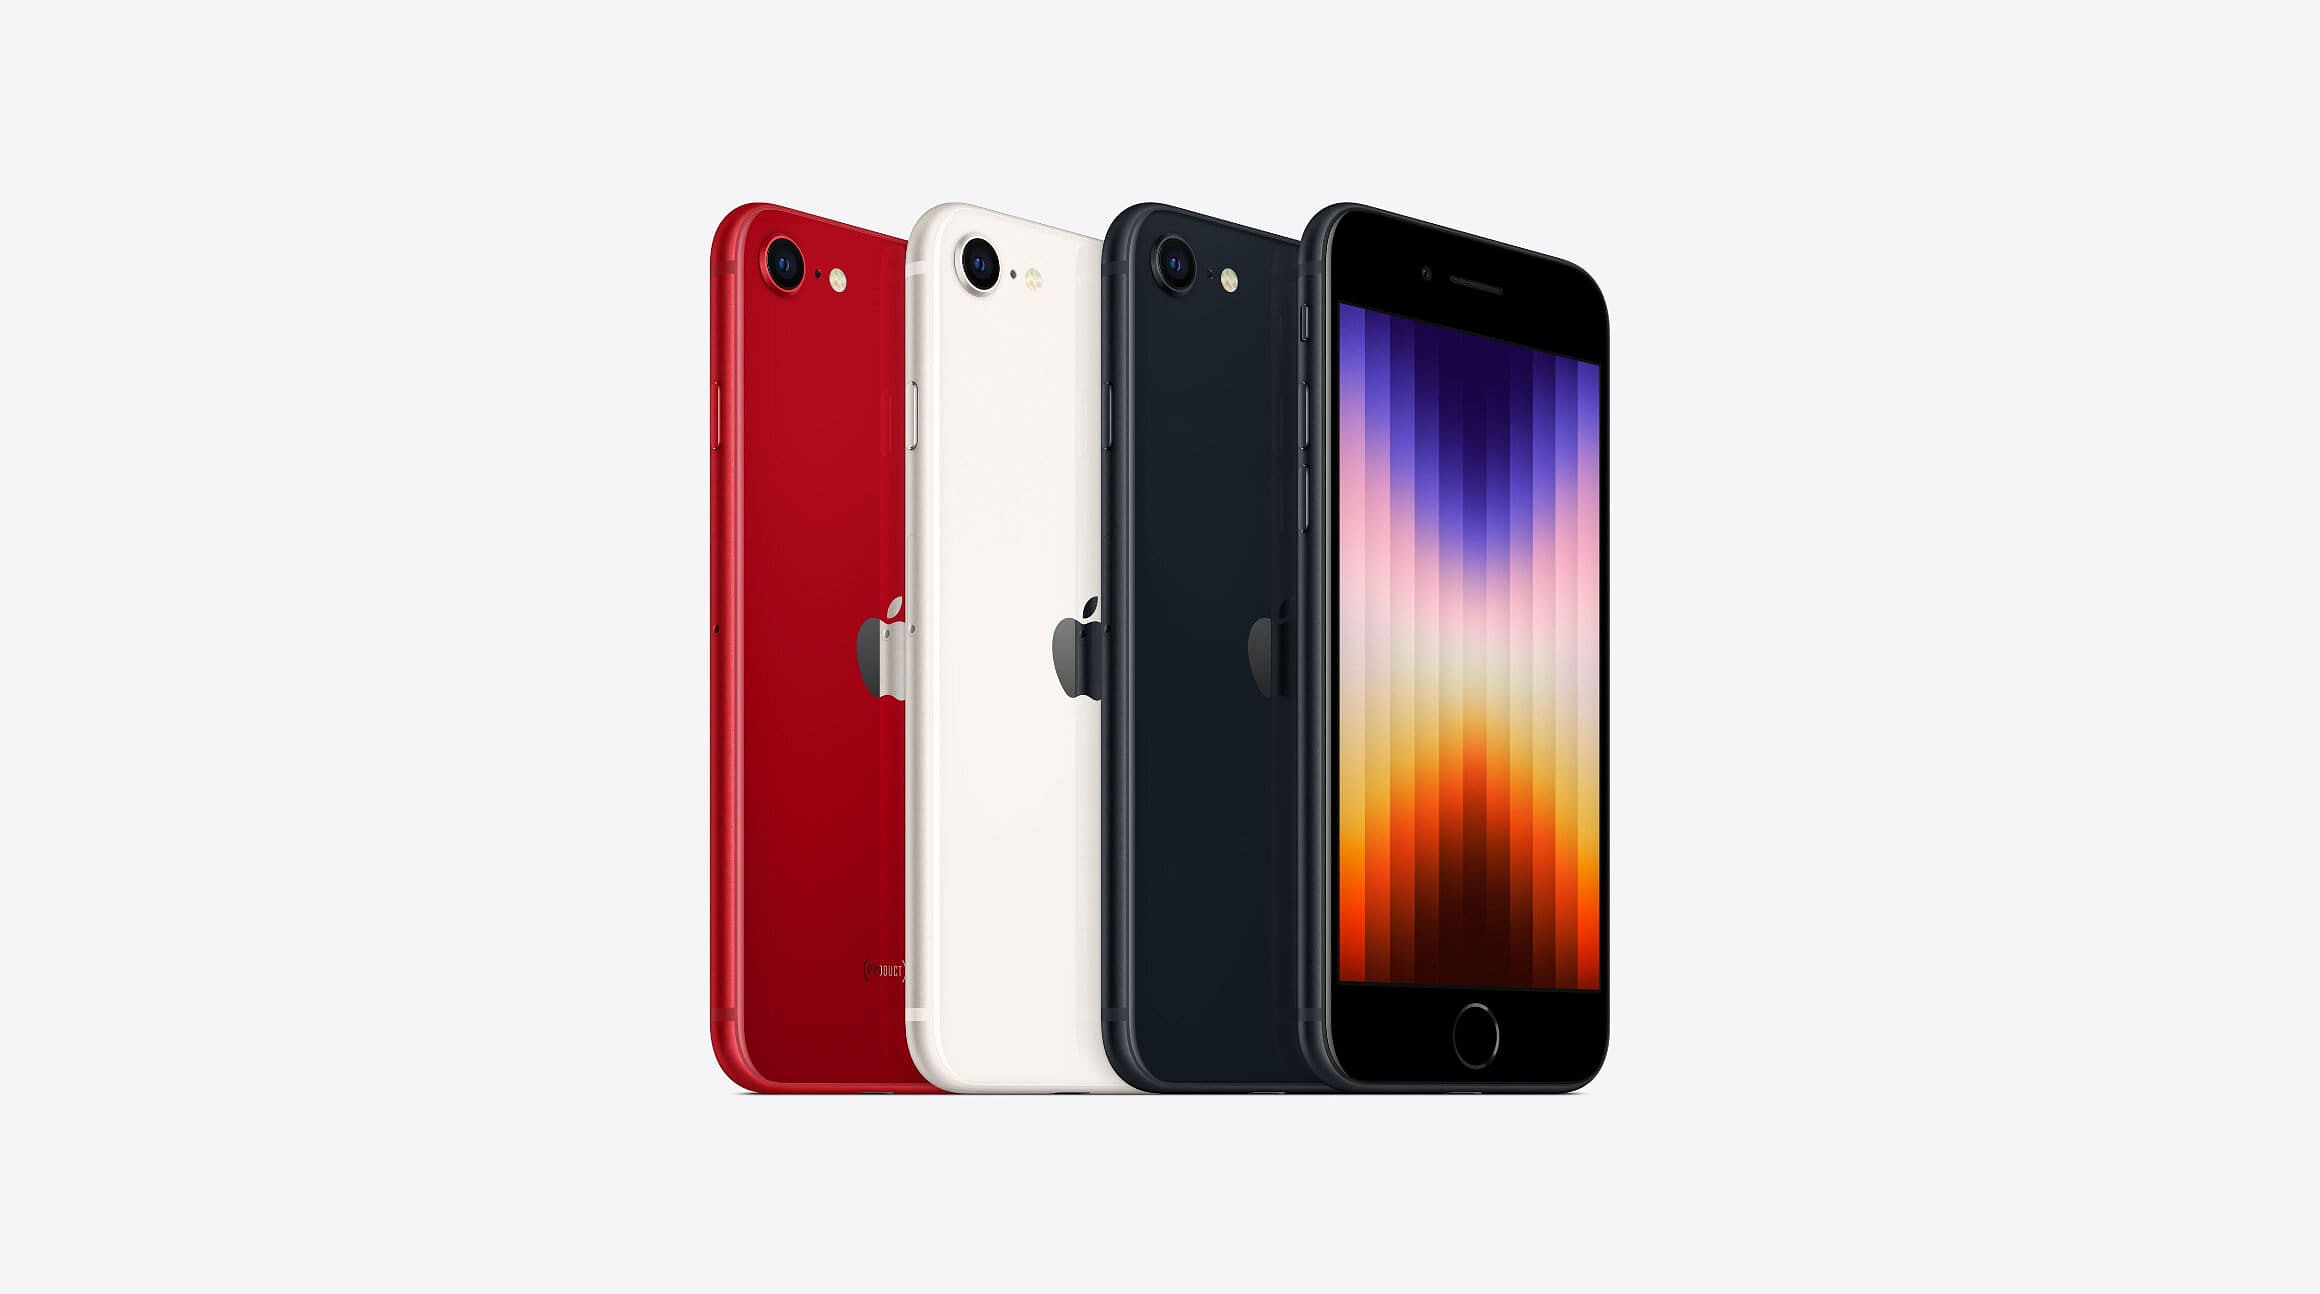 iphone se 3rd generation in 4 colors